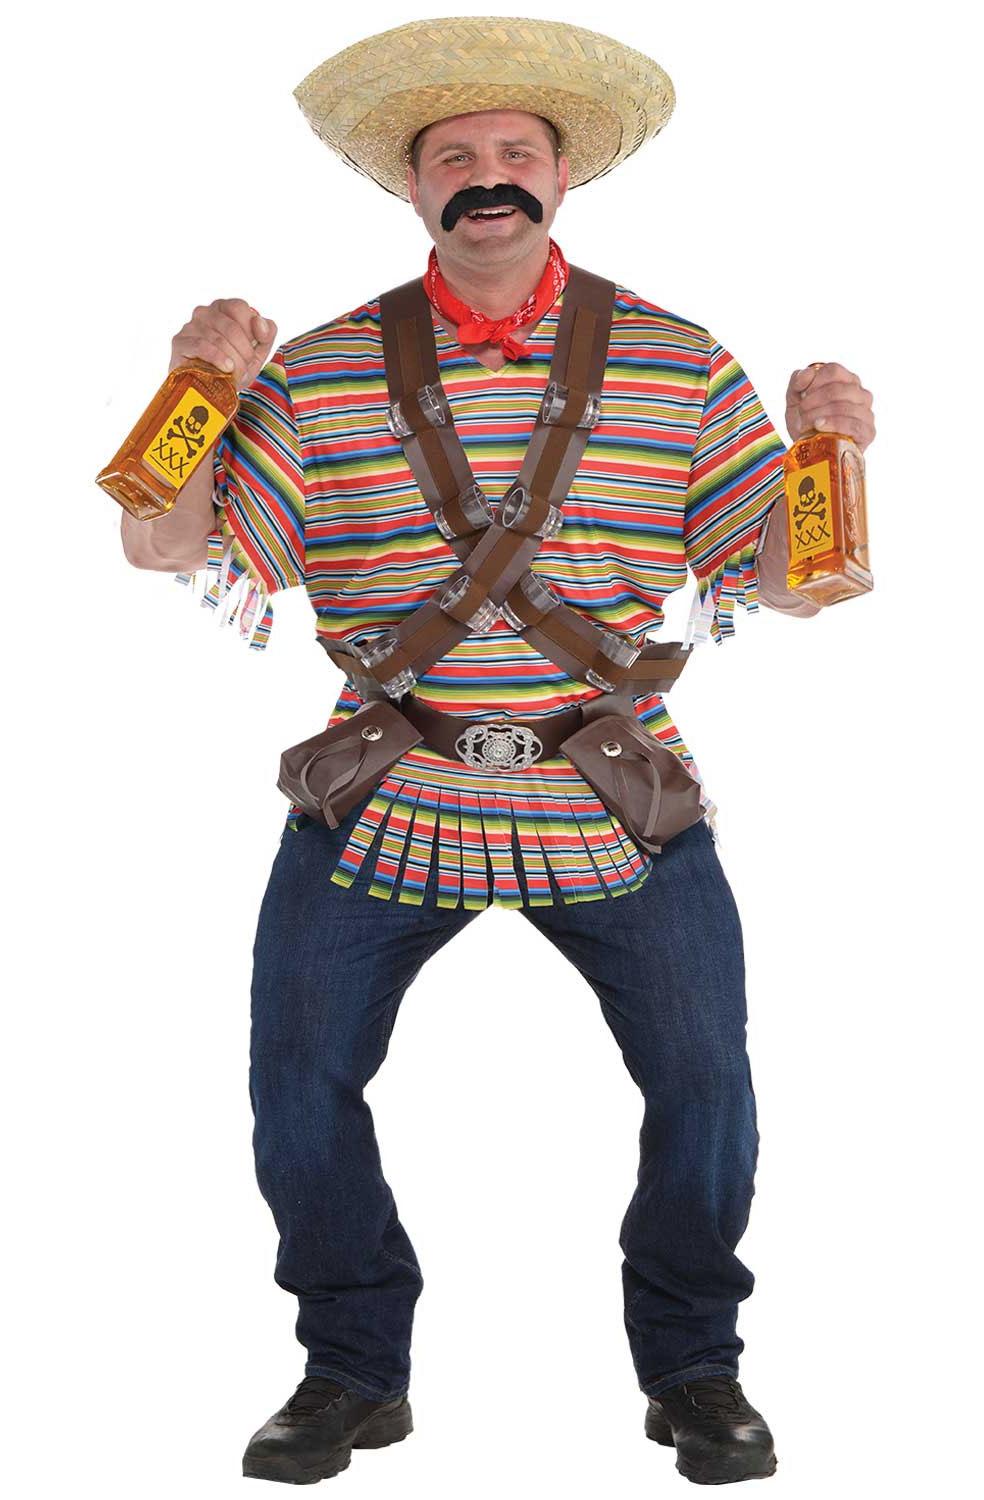 Tequila Bandido Mexican costume by Amscan 845766 and available from Karnival Costumes online party shop